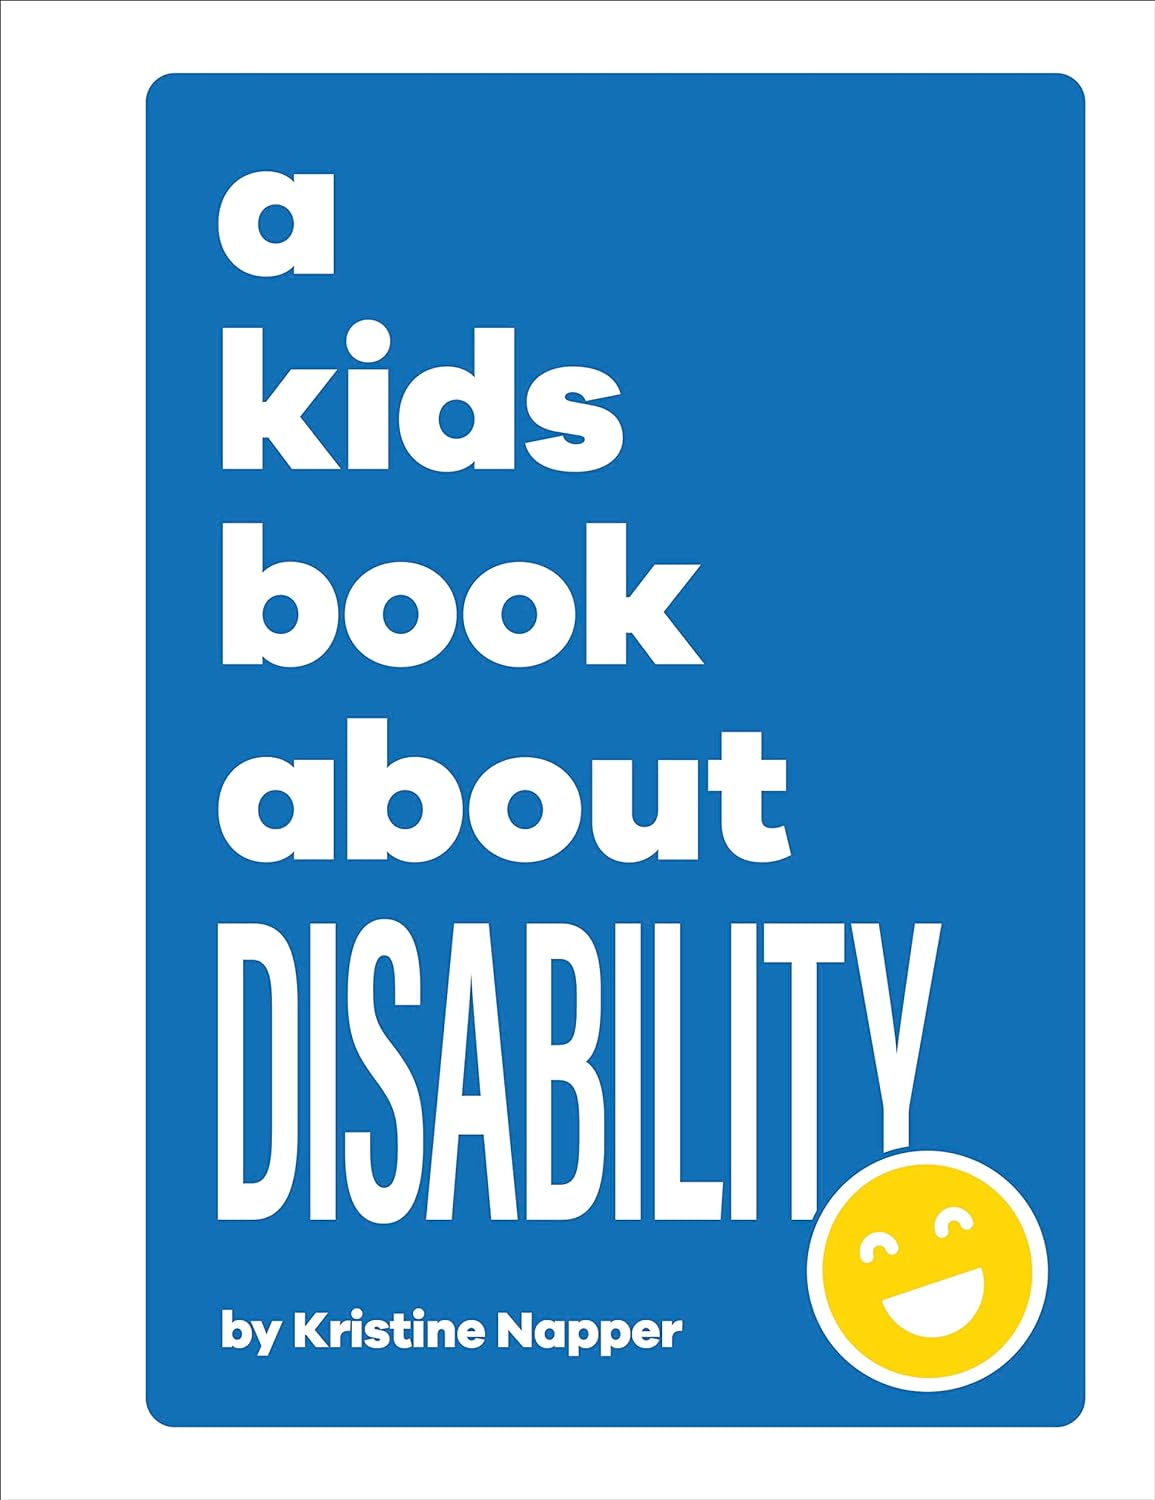 Image for "A Kids Book about Disability"